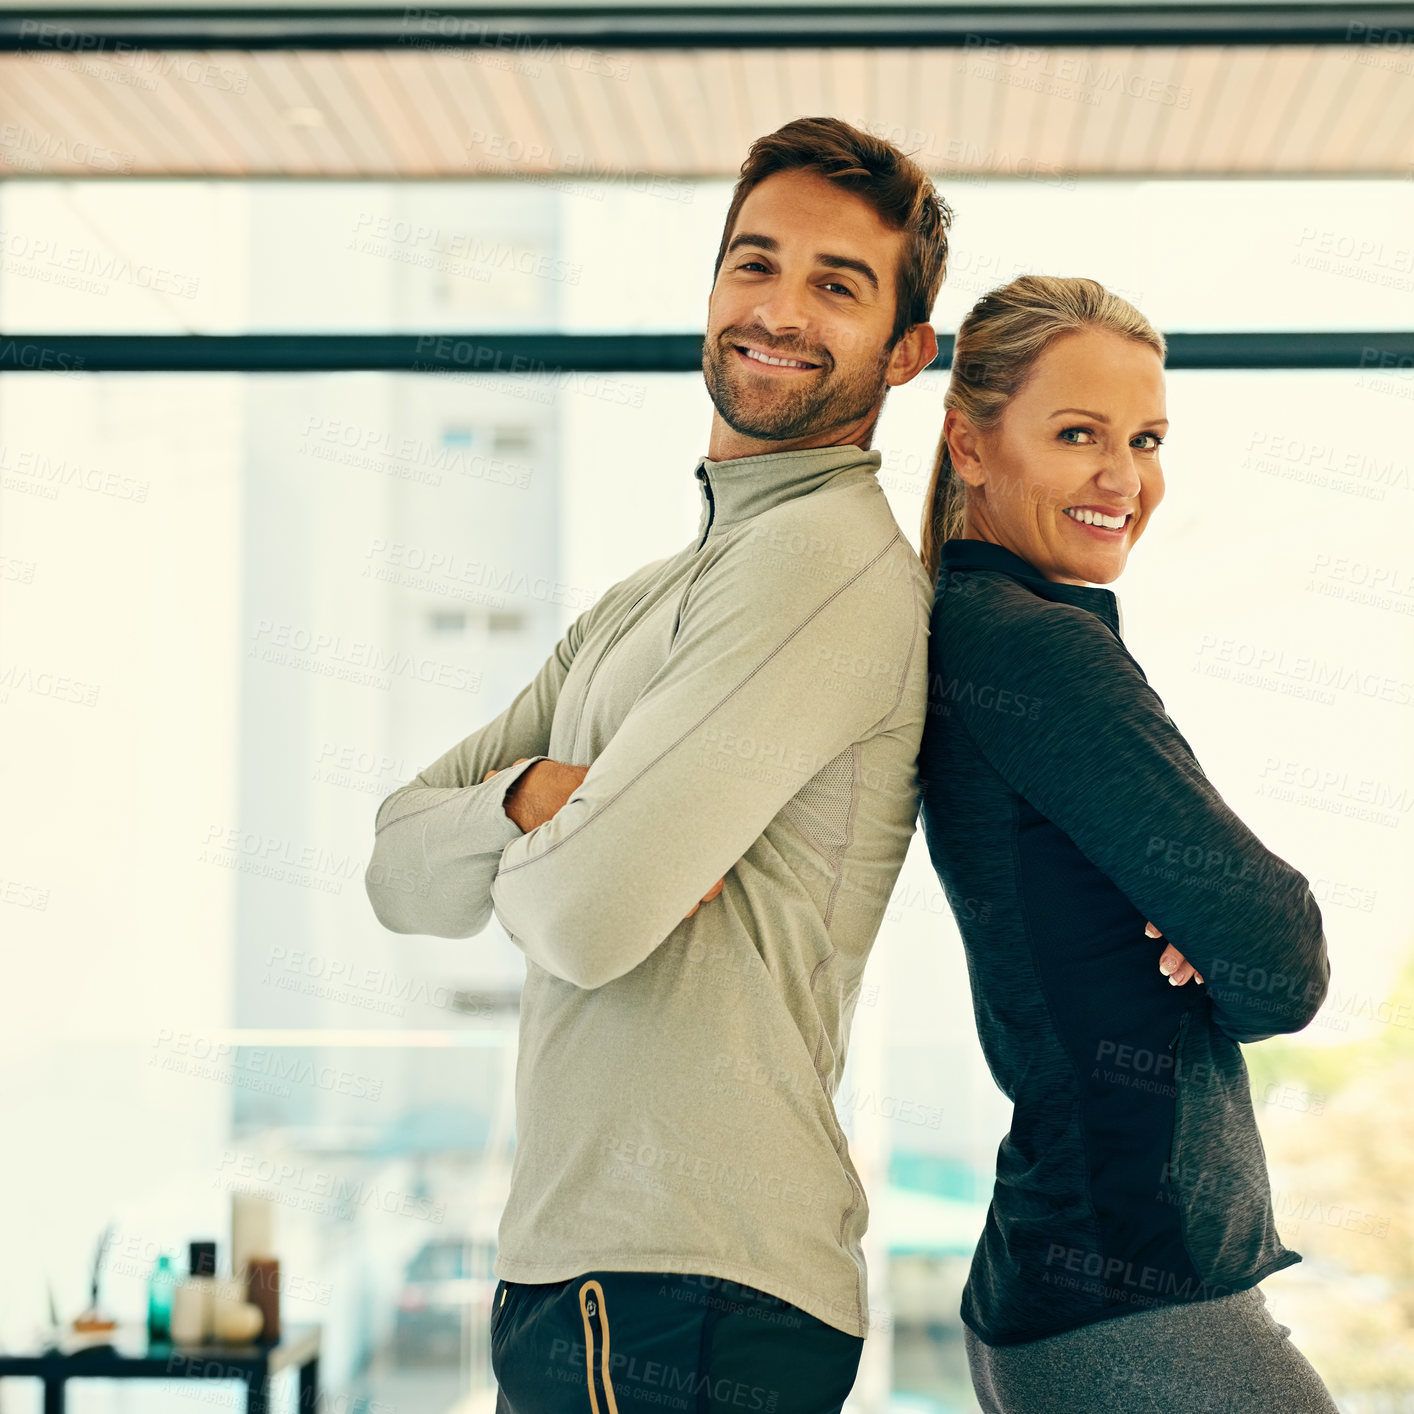 Buy stock photo Portrait of two happy physiotherapists posing together in a fitness center